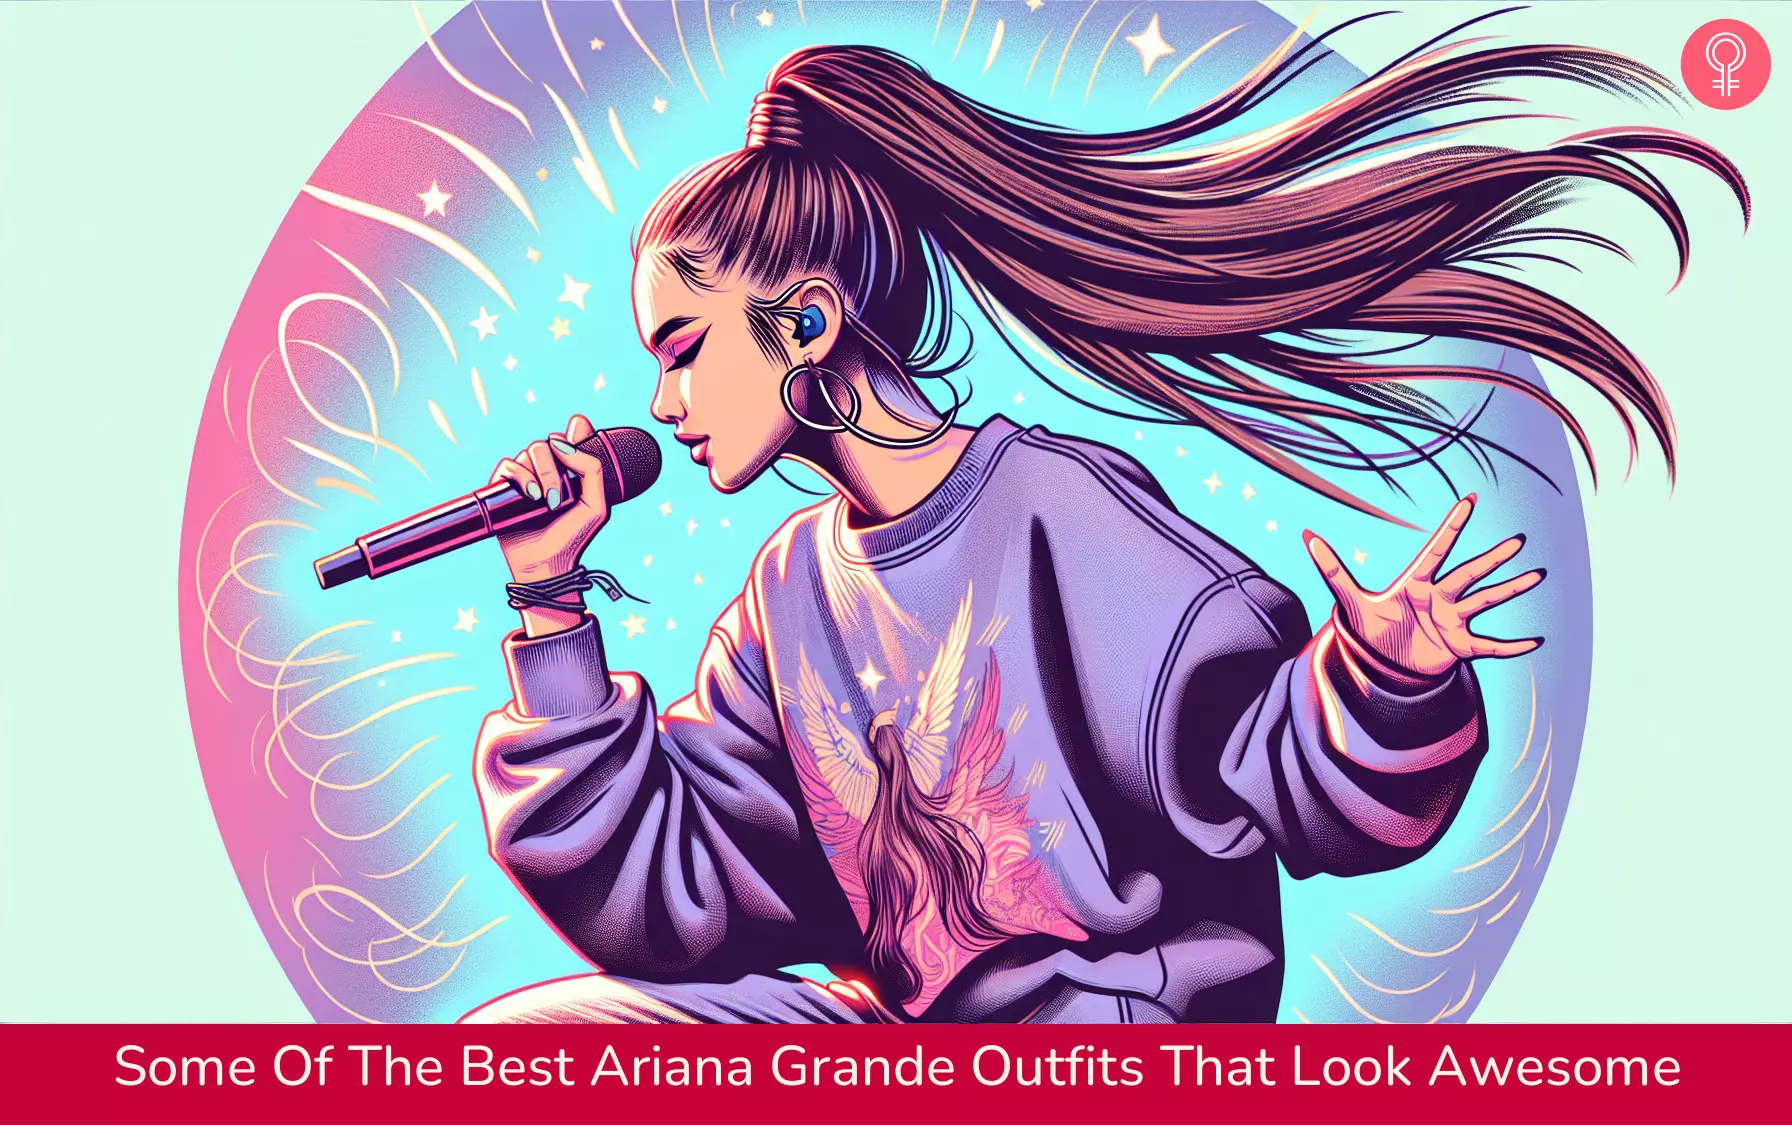 Some Of The Best Ariana Grande Outfits That Look Awesome